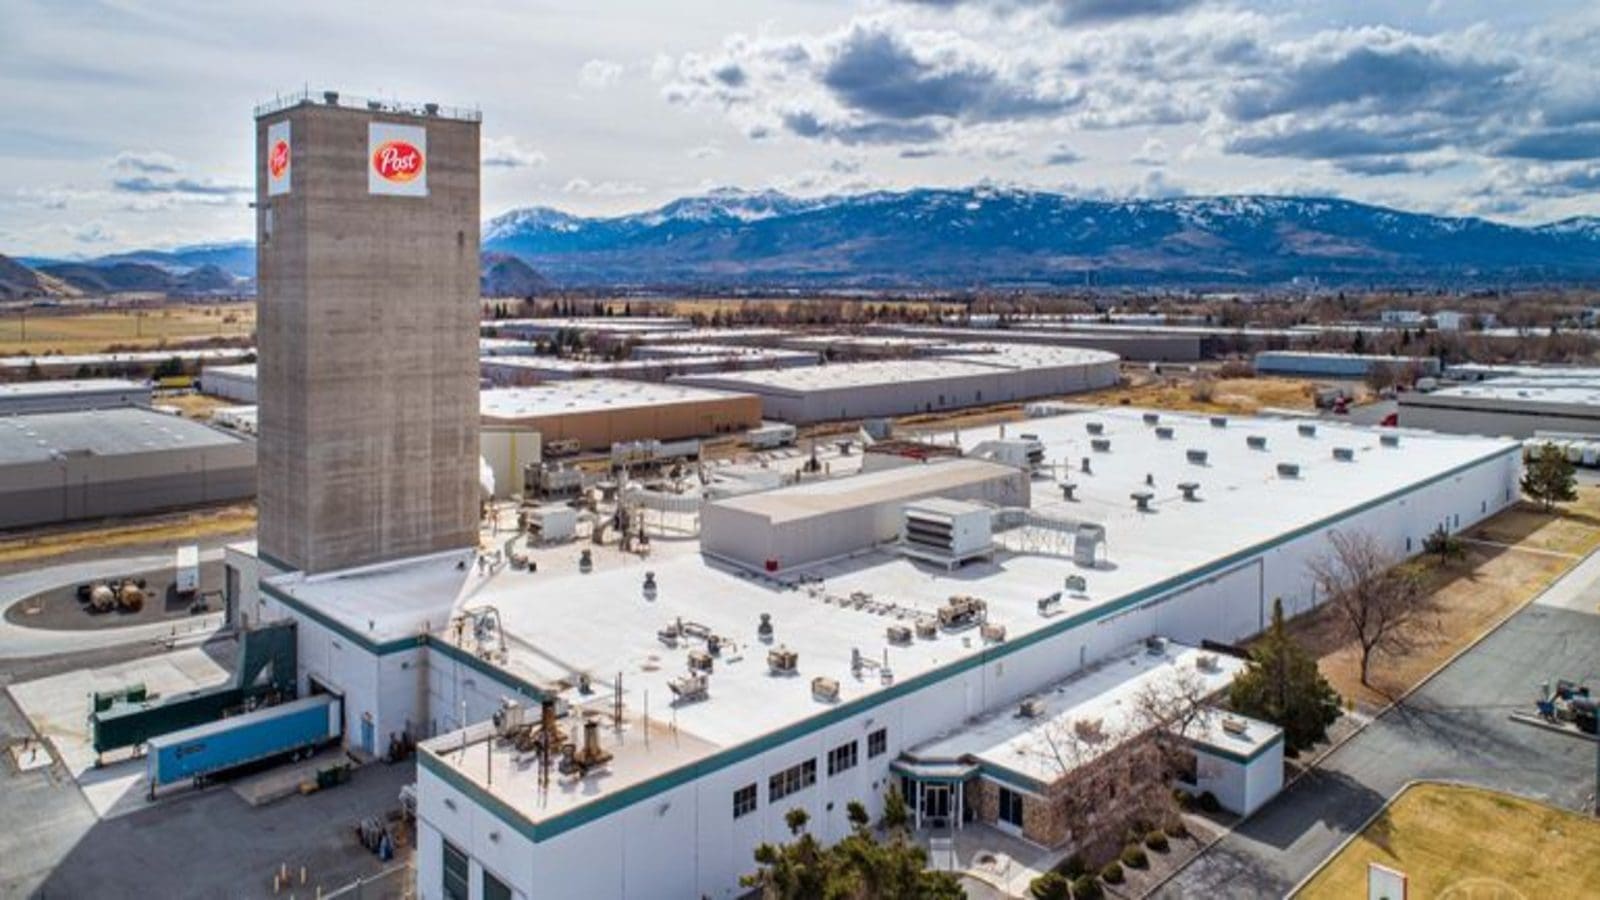 Post to invest US$110M to expand Nevada facility cereal production capacity